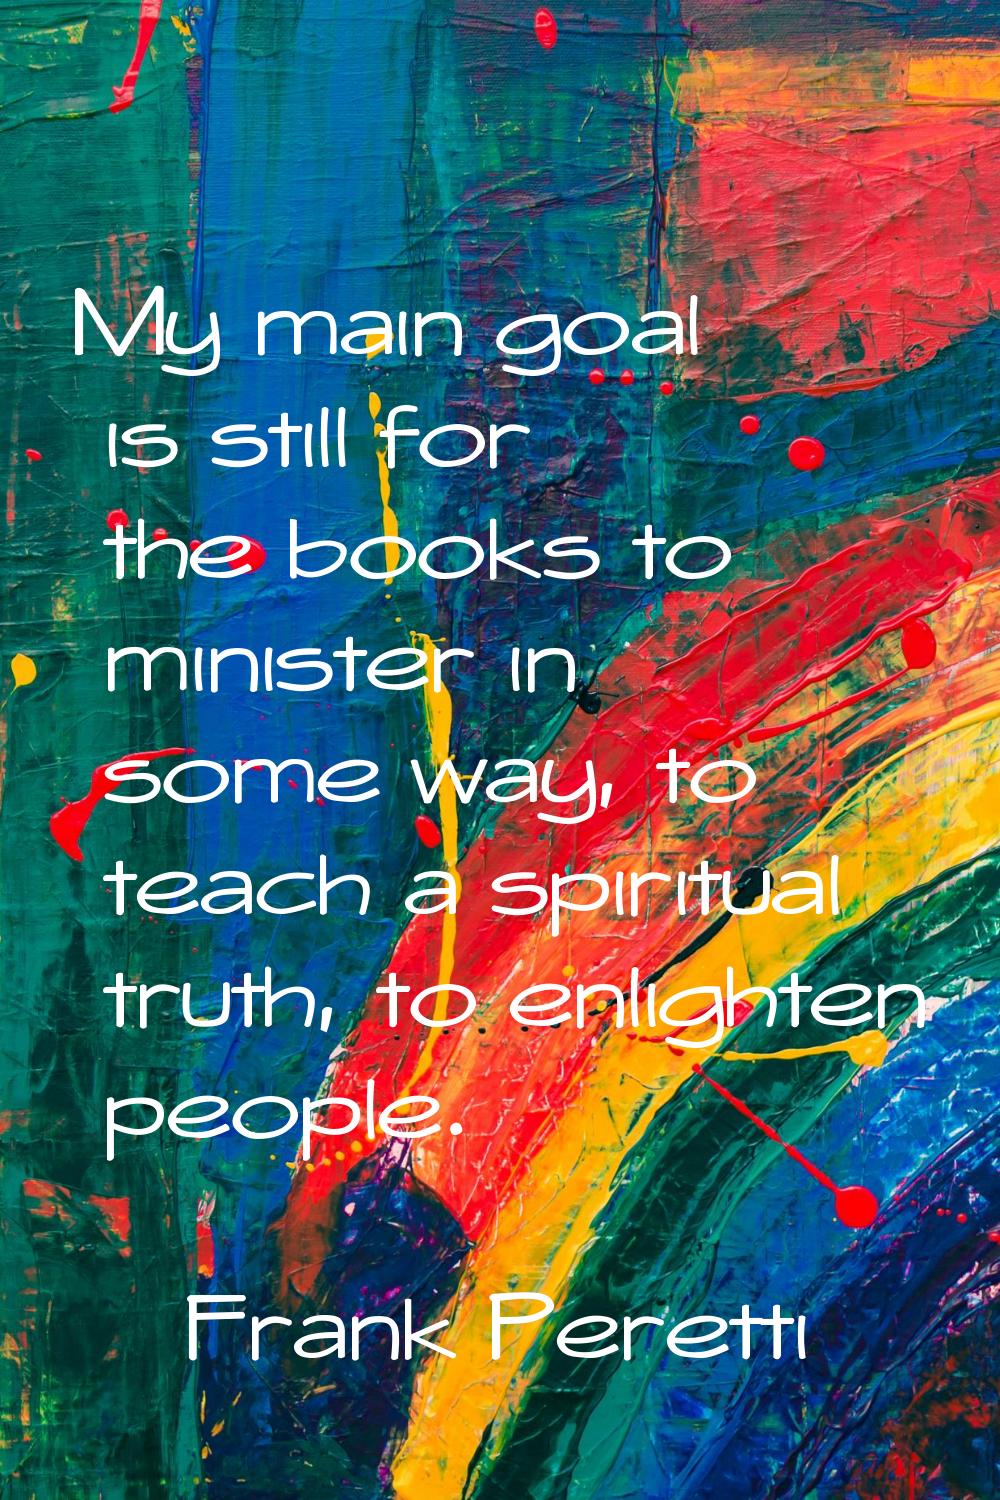 My main goal is still for the books to minister in some way, to teach a spiritual truth, to enlight